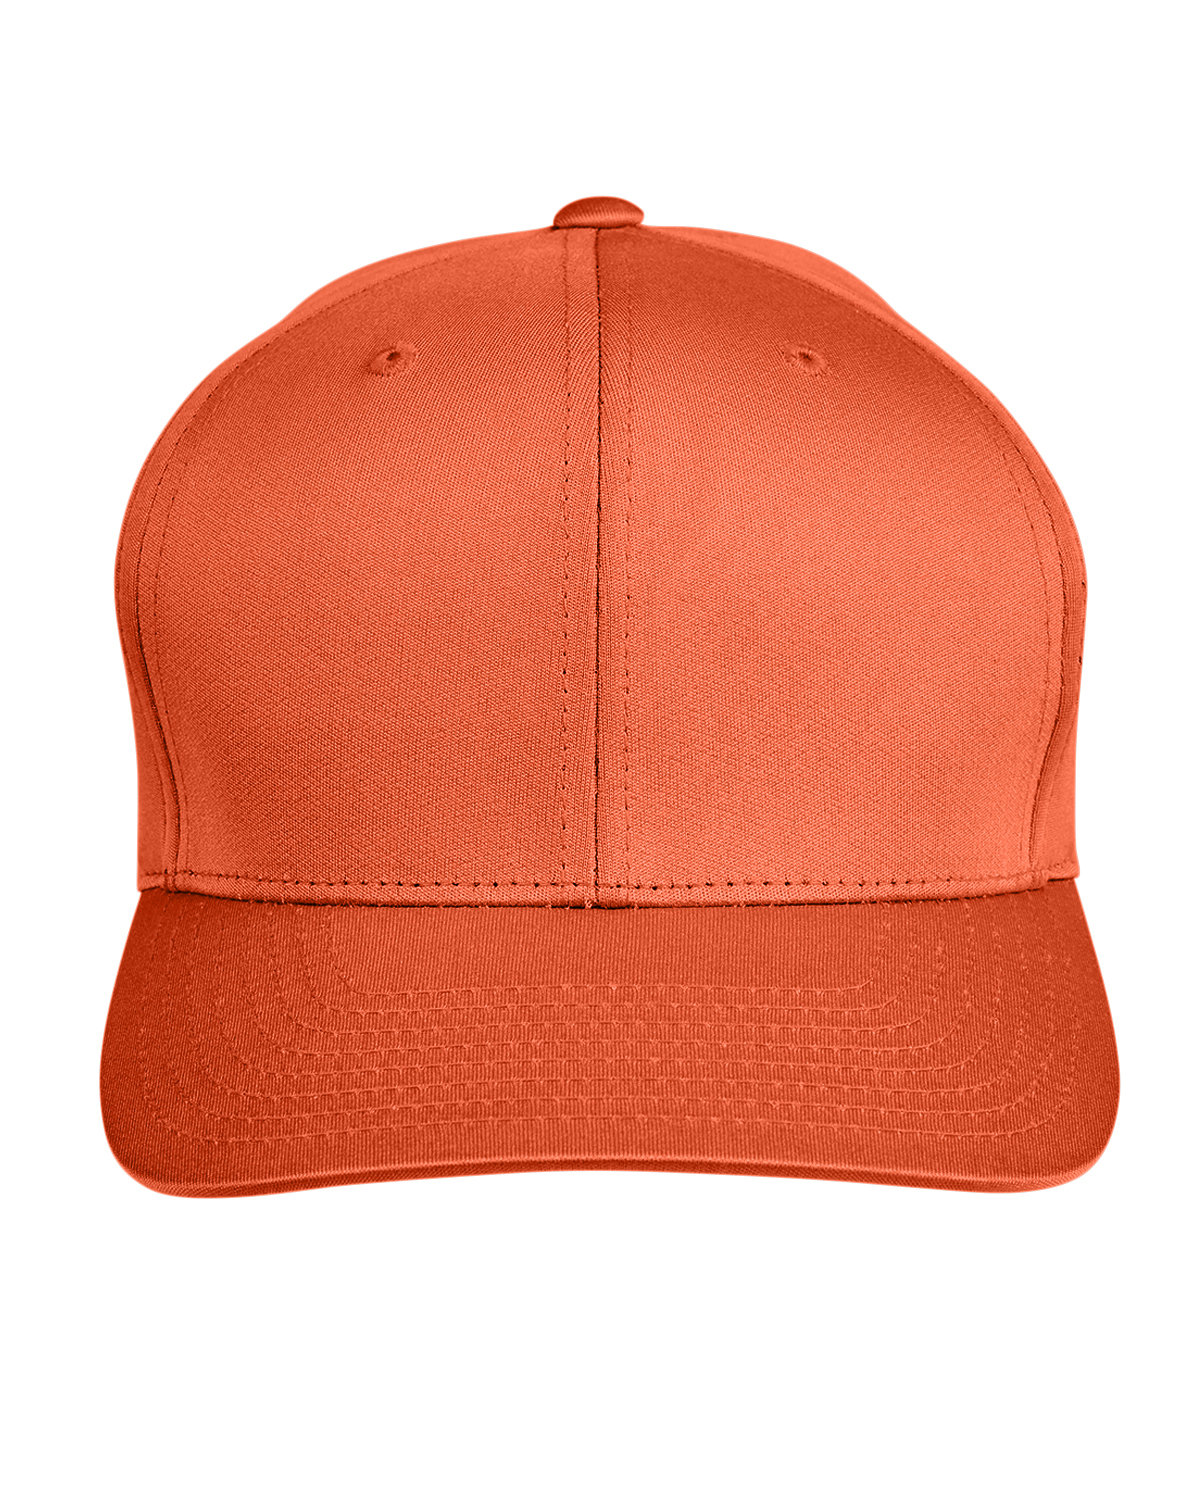 Team 365 by Yupoong® Adult Zone Performance Cap SPORT ORANGE 